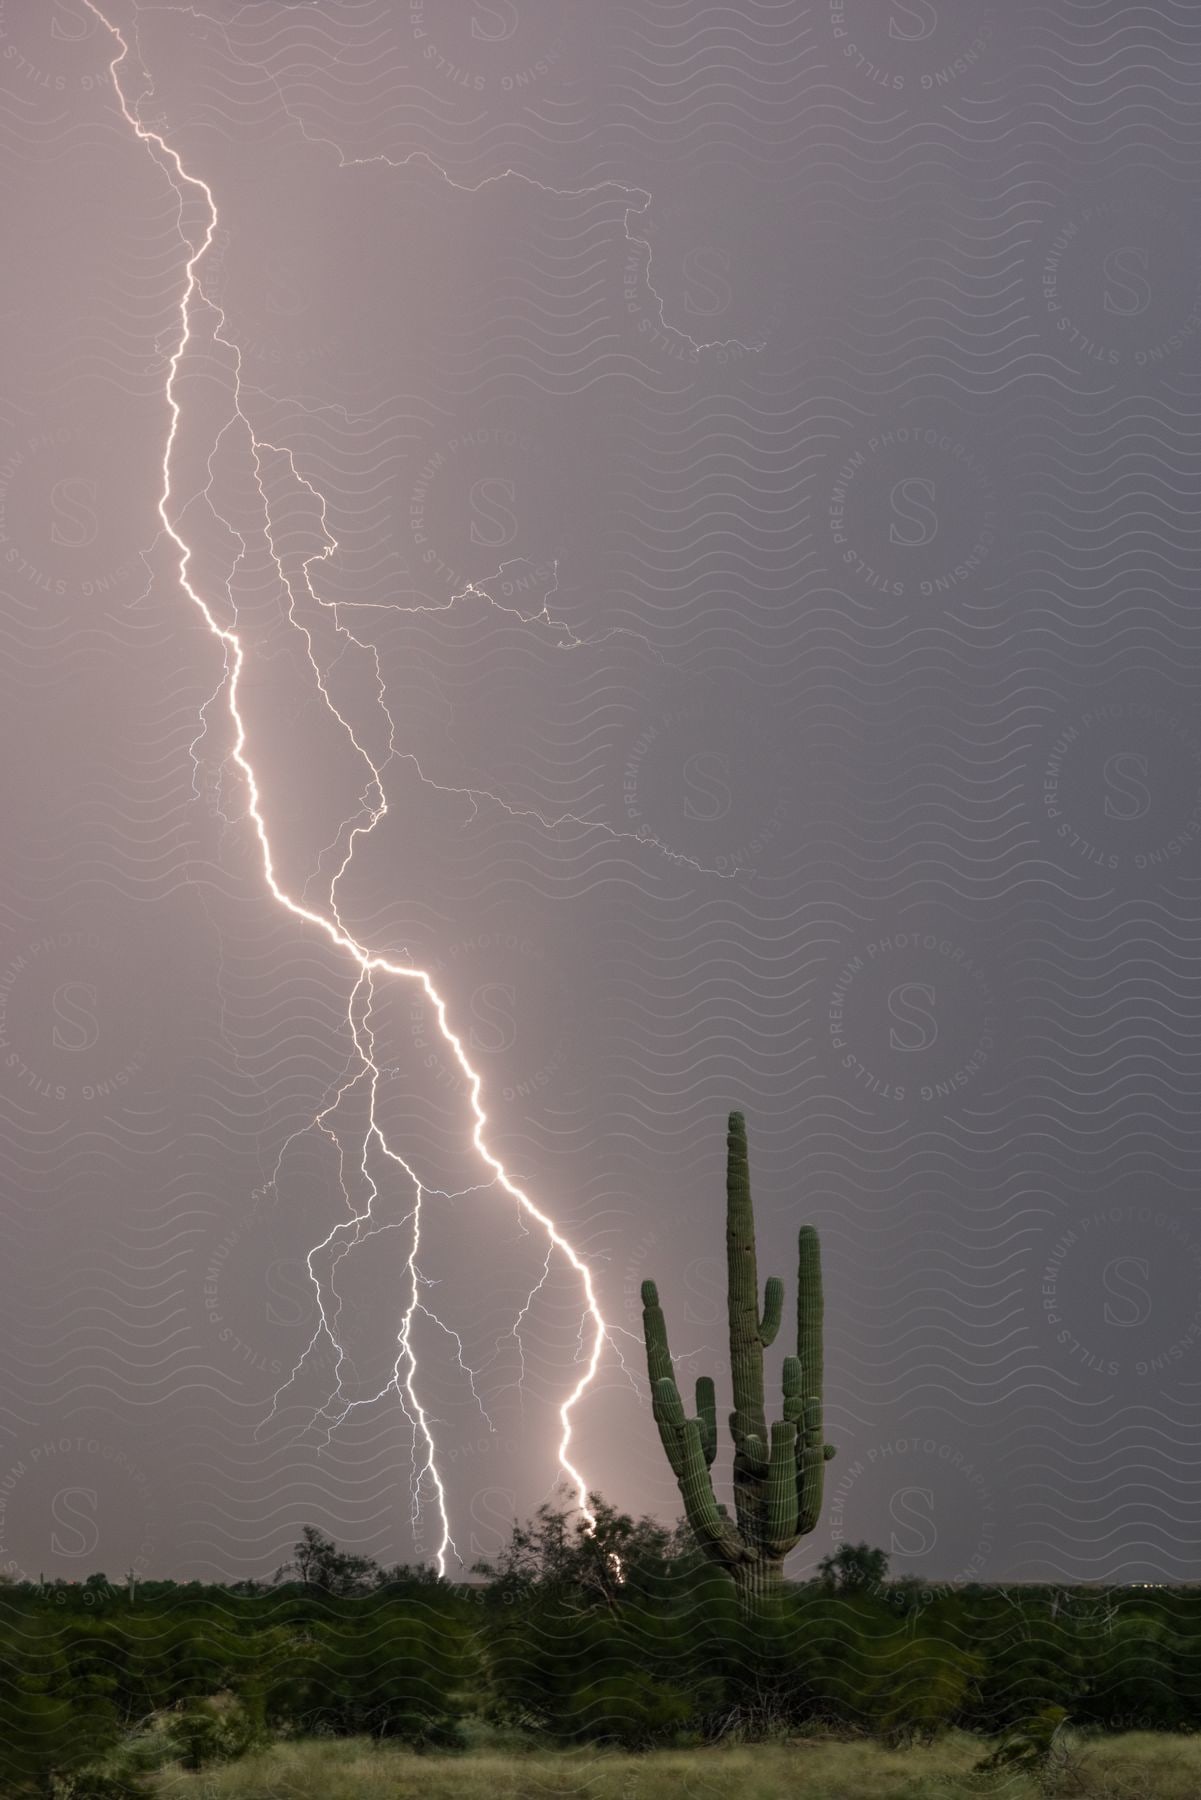 Lightning strikes behind a cactus in the night sky